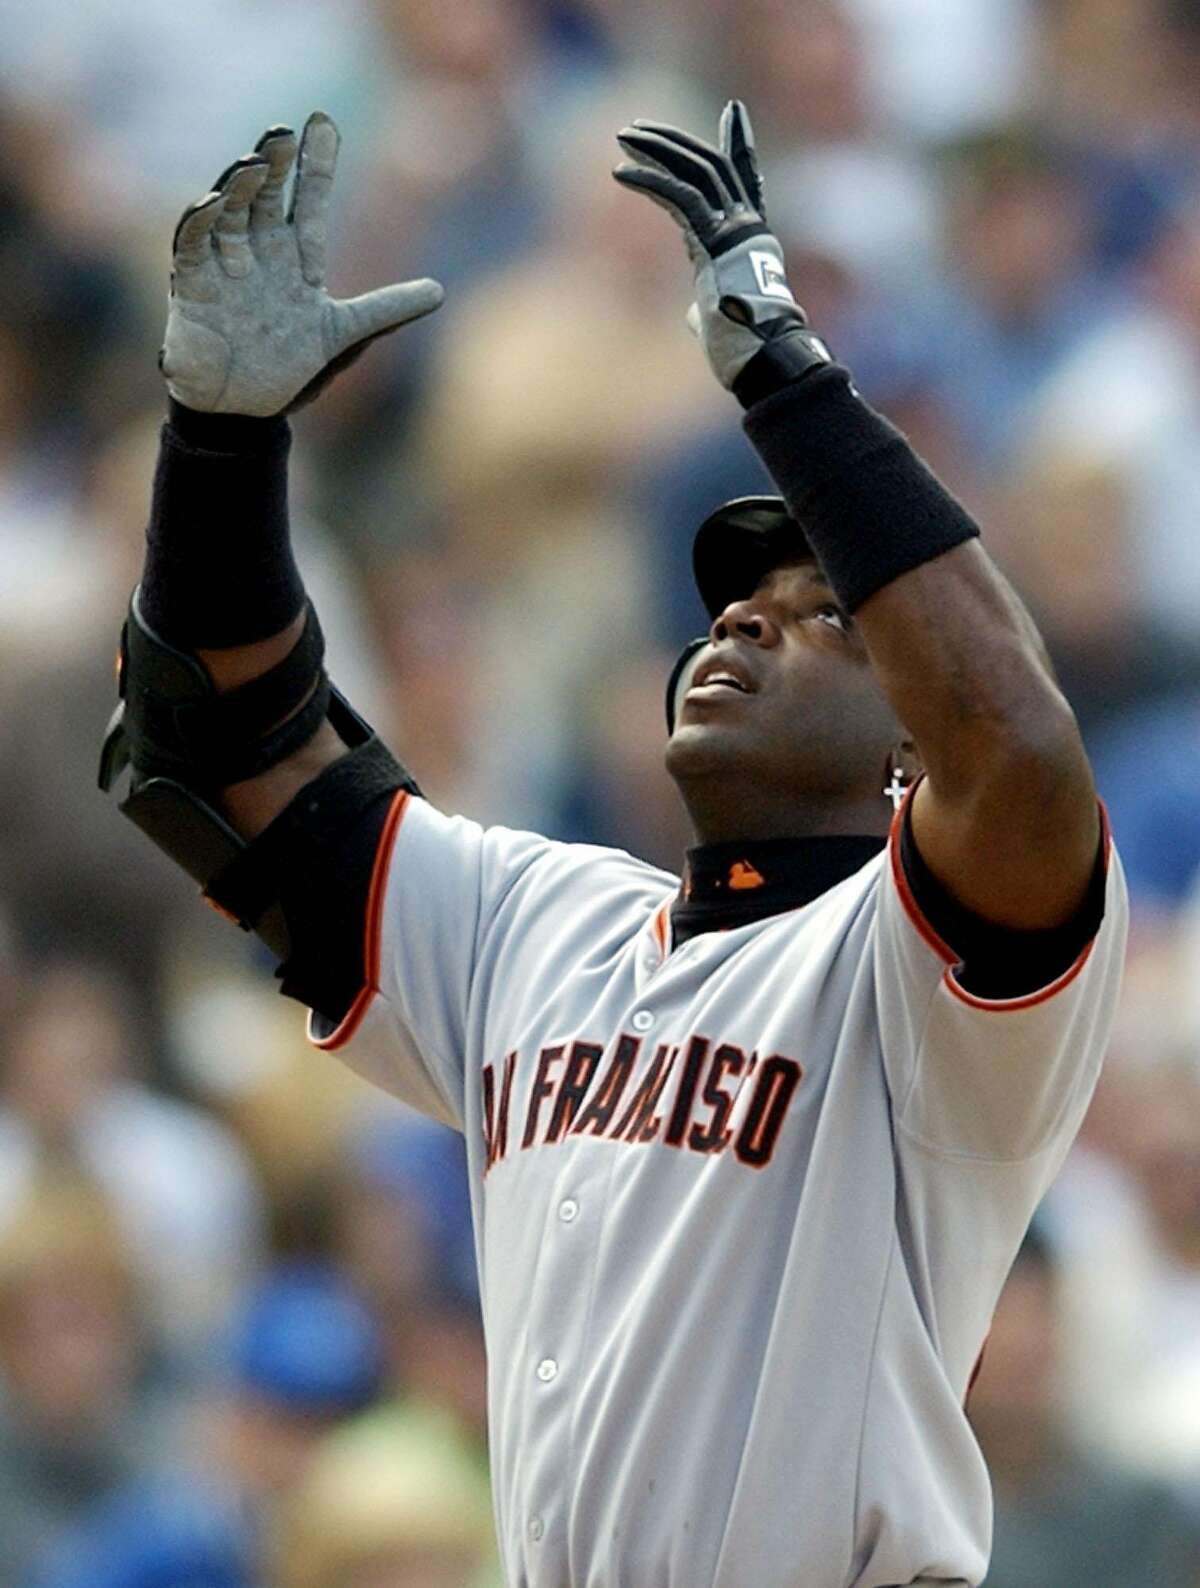 San Francisco Giants slugger Barry Bonds raises his arms as he crosses home plate after hitting his second home run of the game against the Los Angeles Dodgers pitcher Omar Daal during the seventh inning of the season opener at Dodger Stadium Tuesday, April 2, 2002, in Los Angeles (AP Photo/Kevork Djansezian)